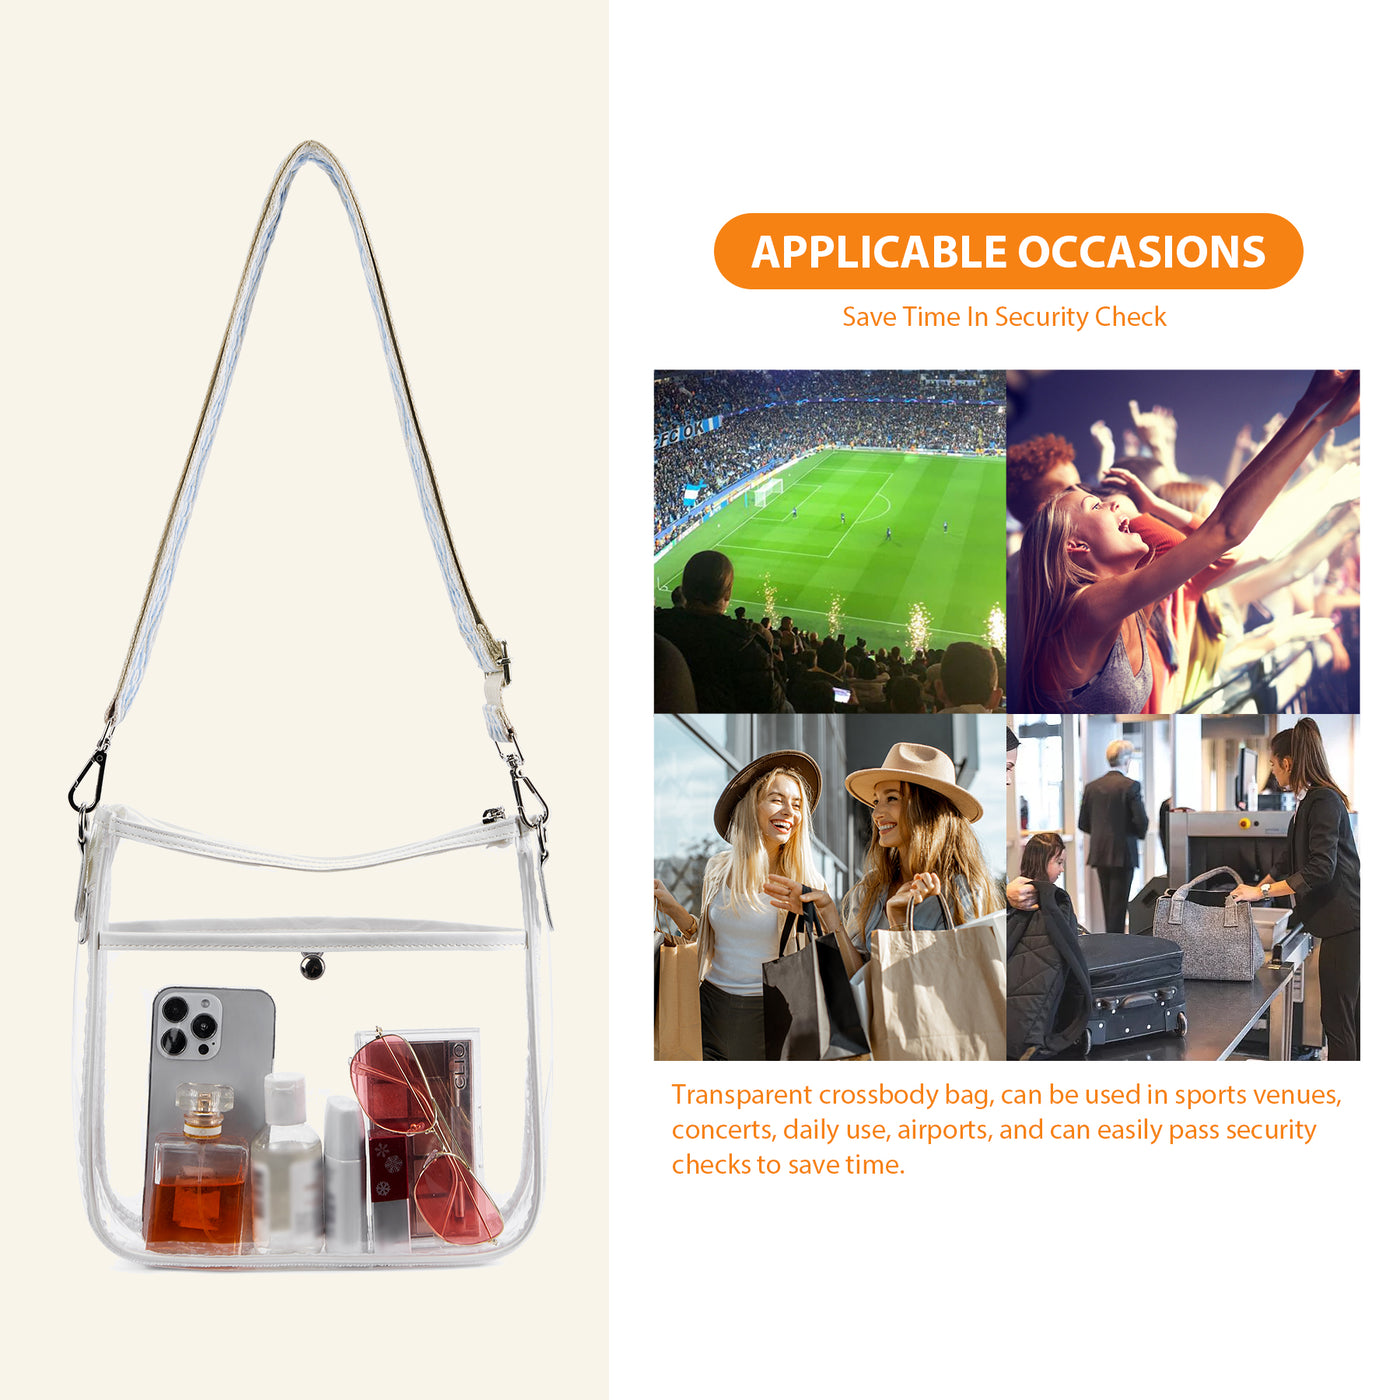 Nola Stadium Approved Clear Concert Bags for Women